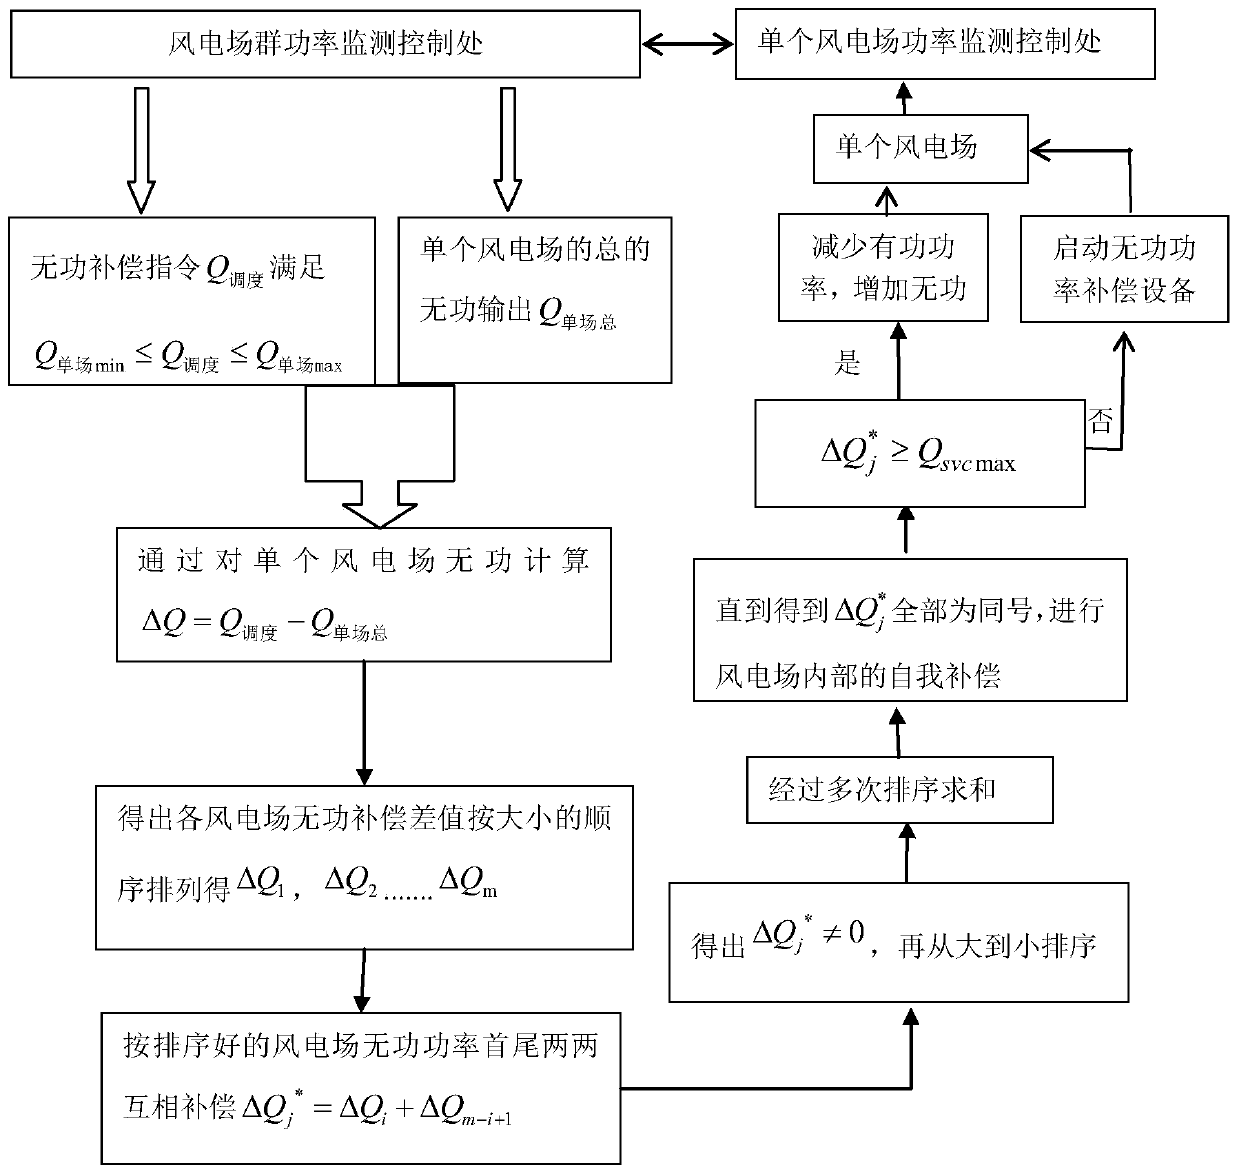 Reactive power compensation method of wind farm group based on reactive power generating capacity of doubly-fed wind turbines